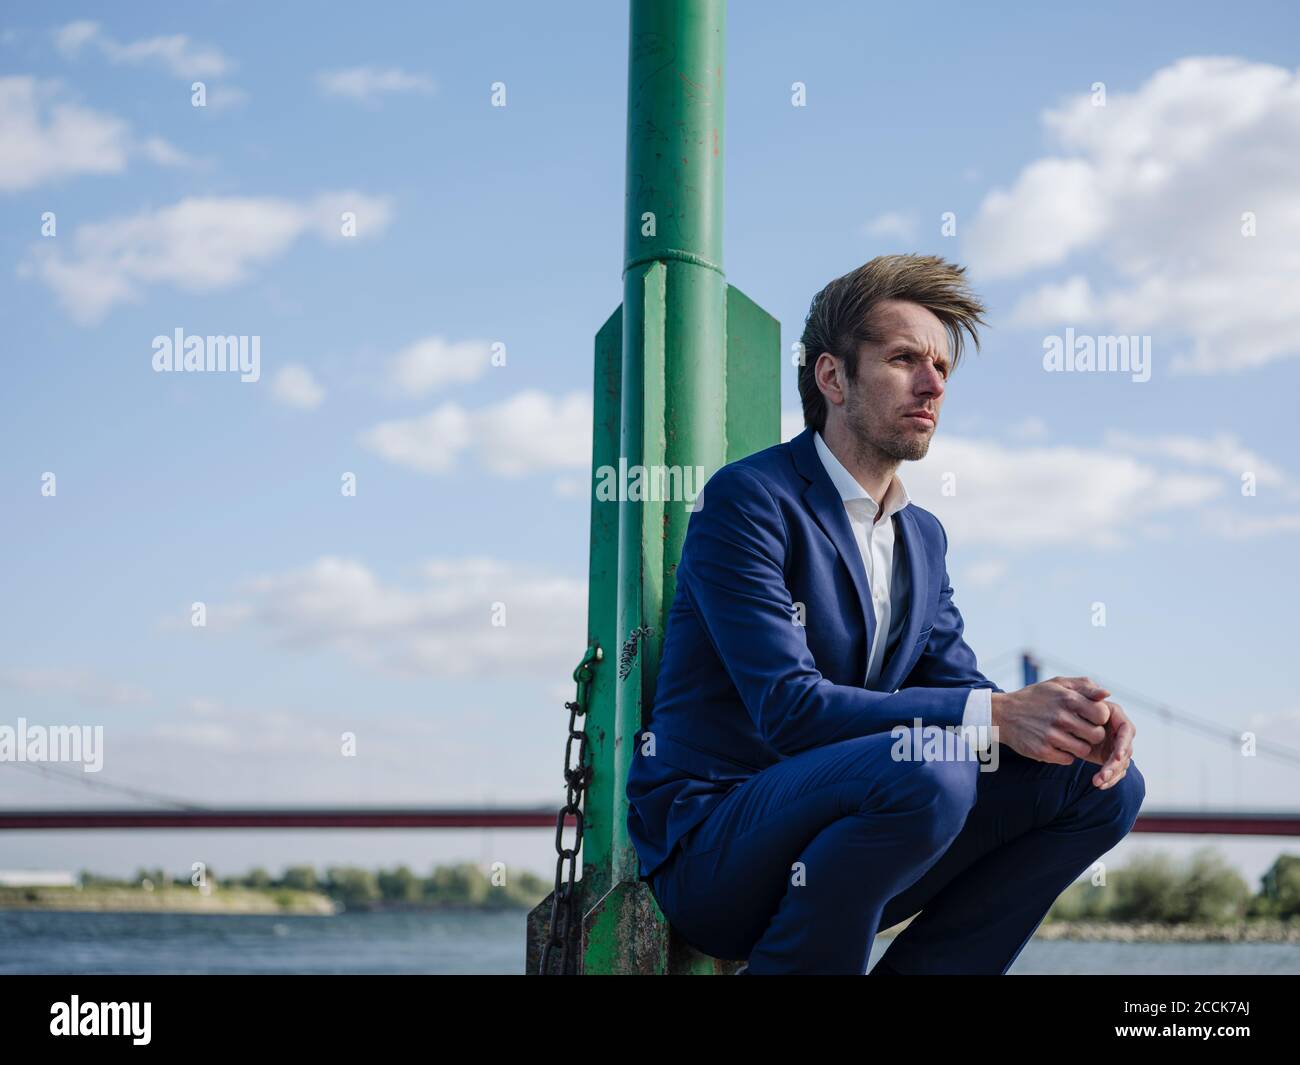 Thoughtful businessman with hands clasped crouching by pole against sky Stock Photo